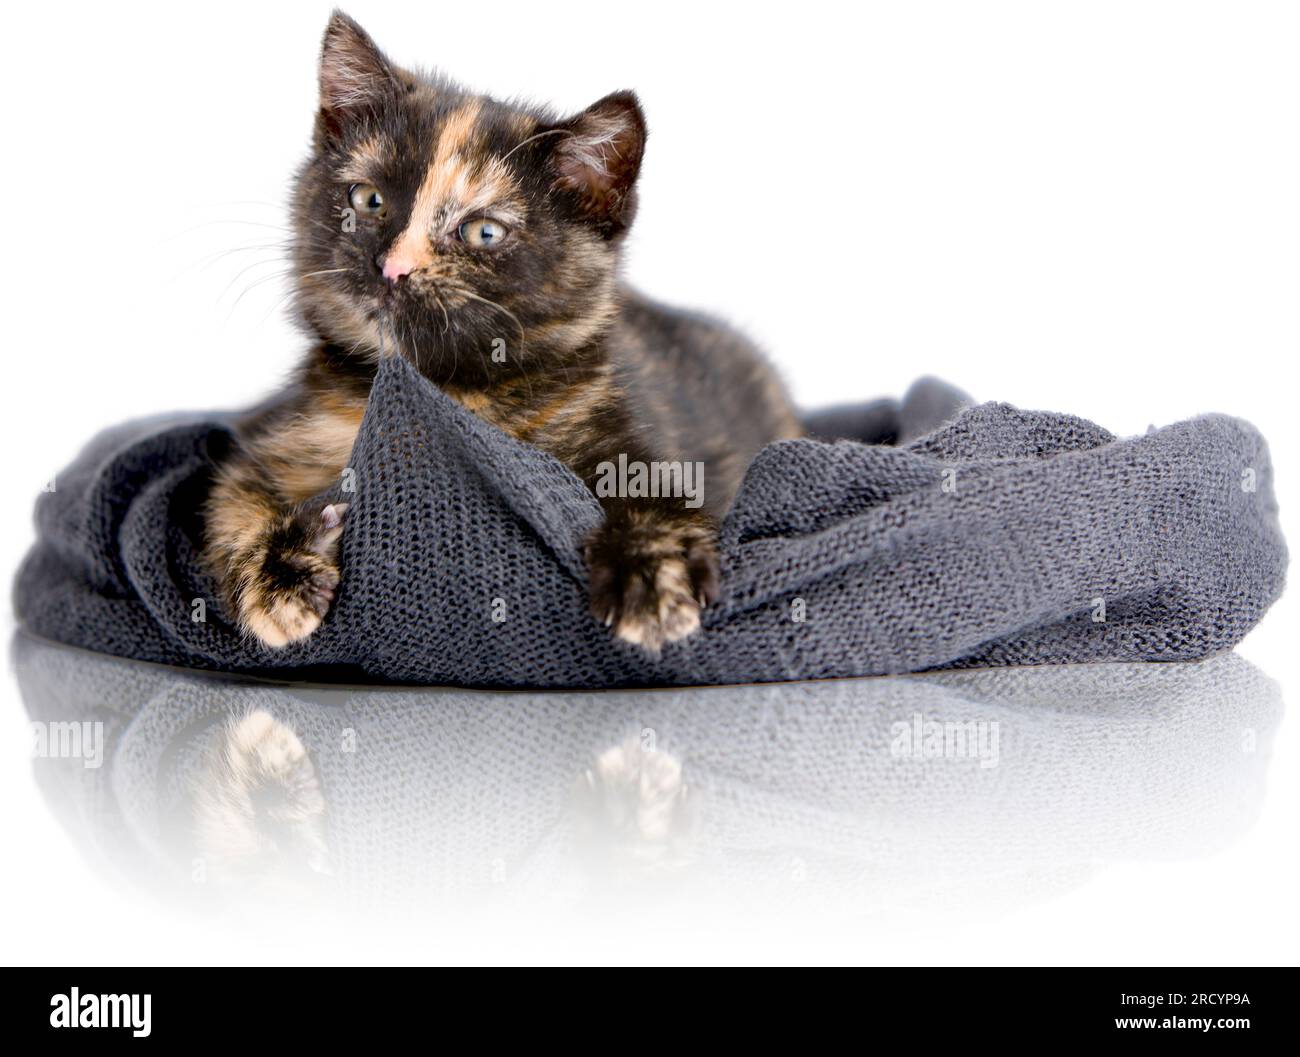 A mischievous cat lies in a shawl and pulls its threads, tearing the material. Stock Photo